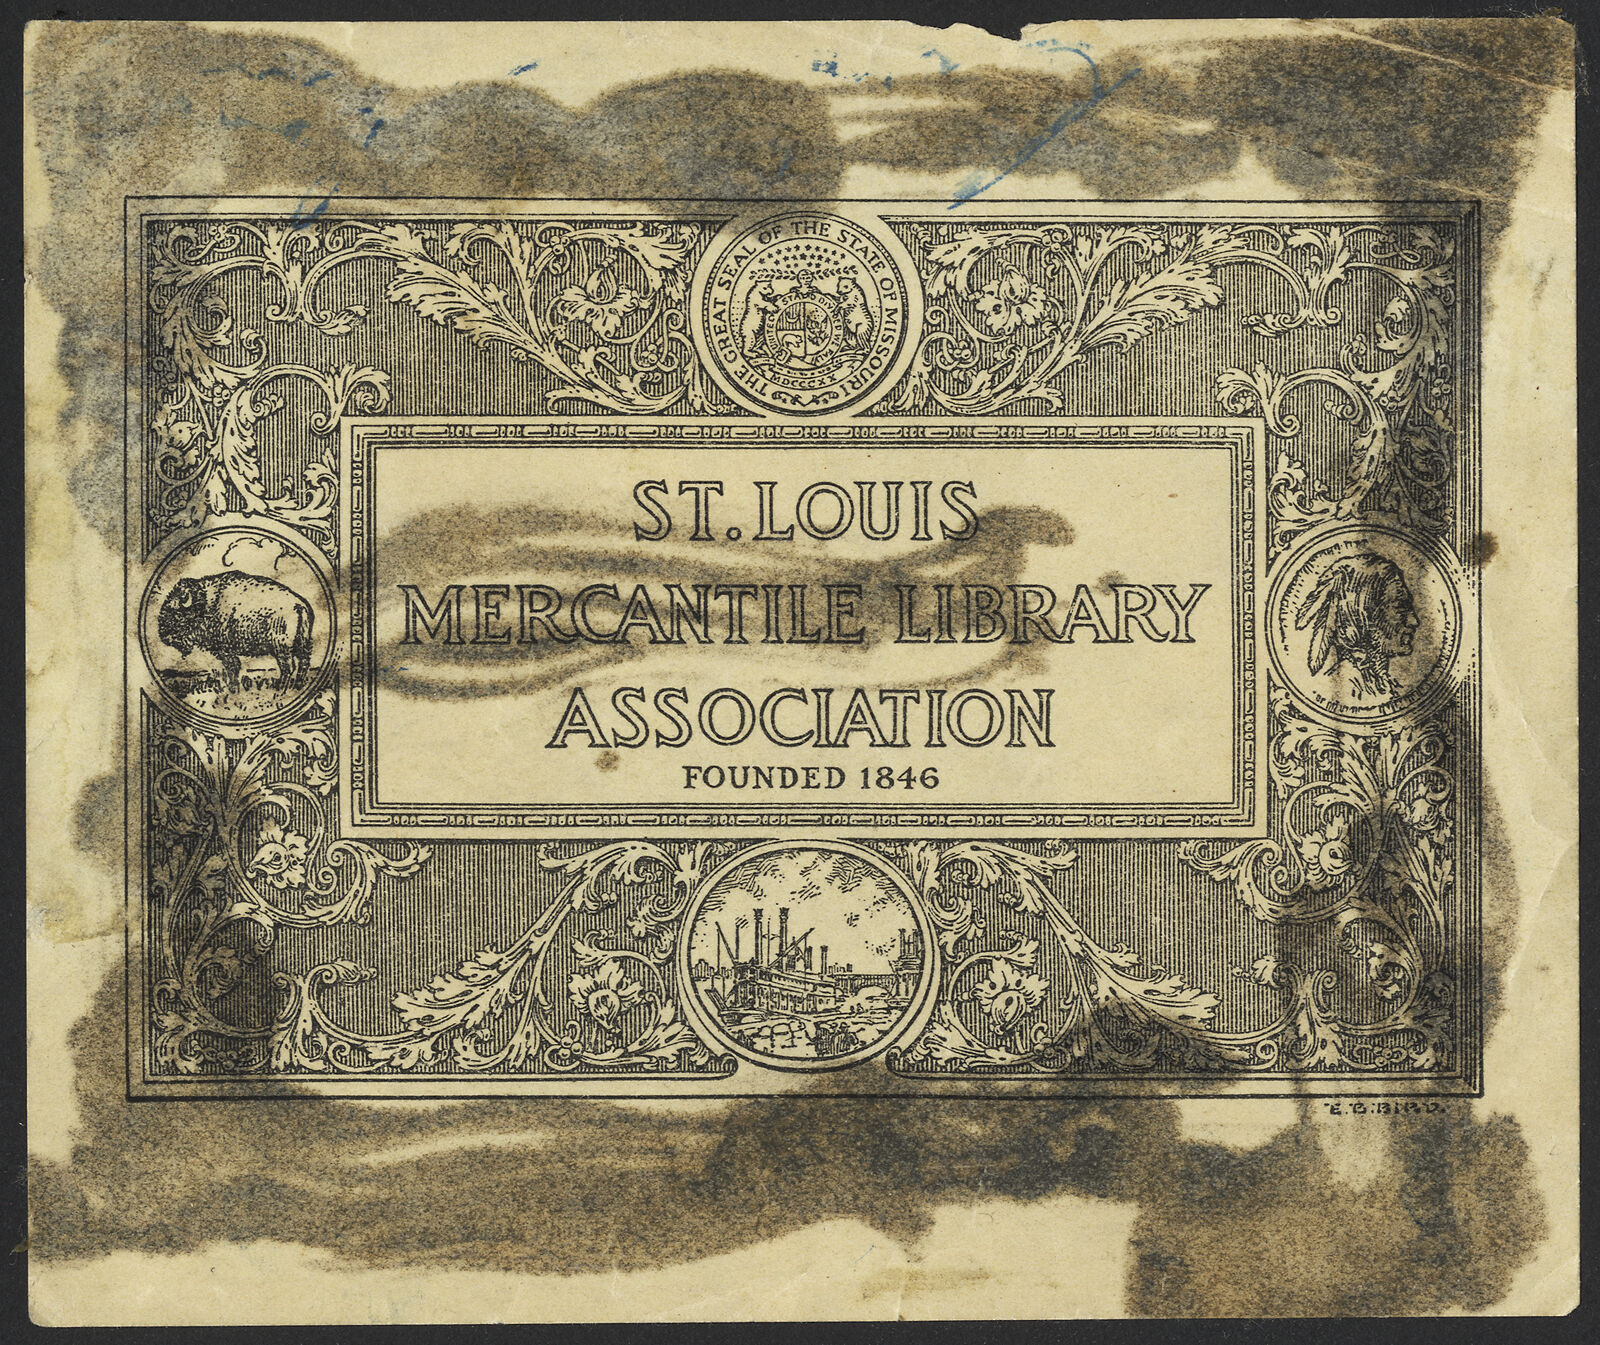 Mercantile Library (Saint Louis, Mo.) | Digital Collections at the University of Illinois at ...